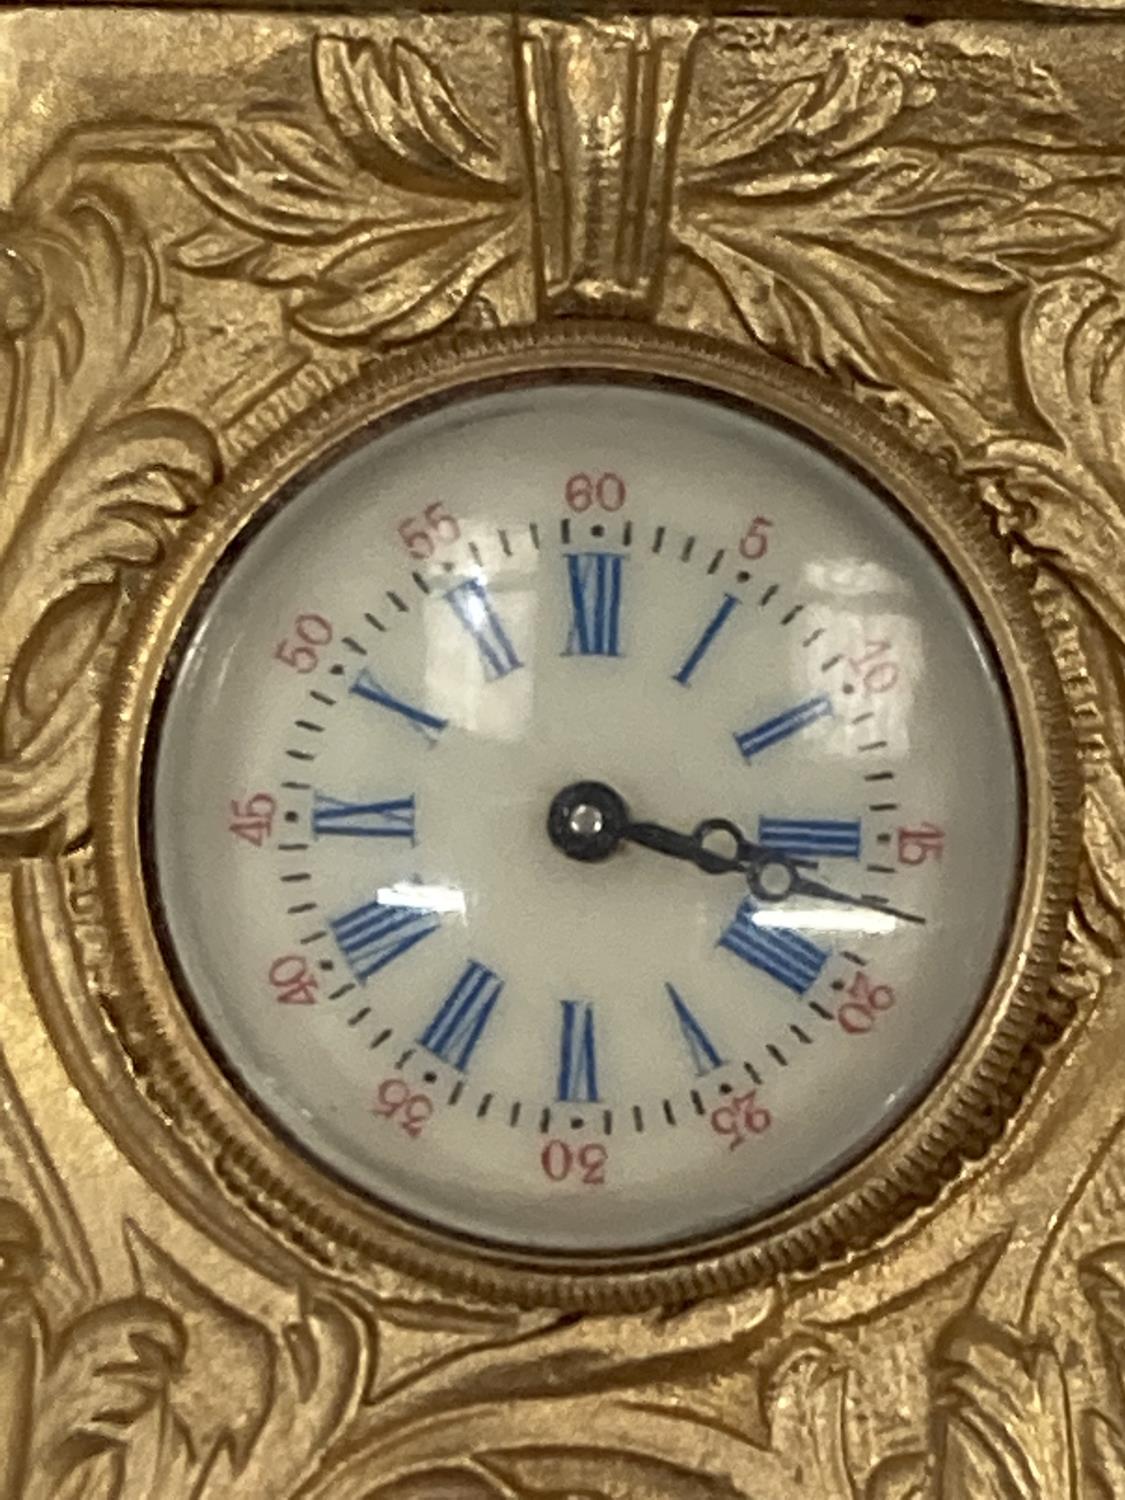 A MINIATURE GILDED FRENCH CLOCK WITH KEY HEIGHT 3.5" SEEN WORKING BUT NO WARRANTY - Image 6 of 6